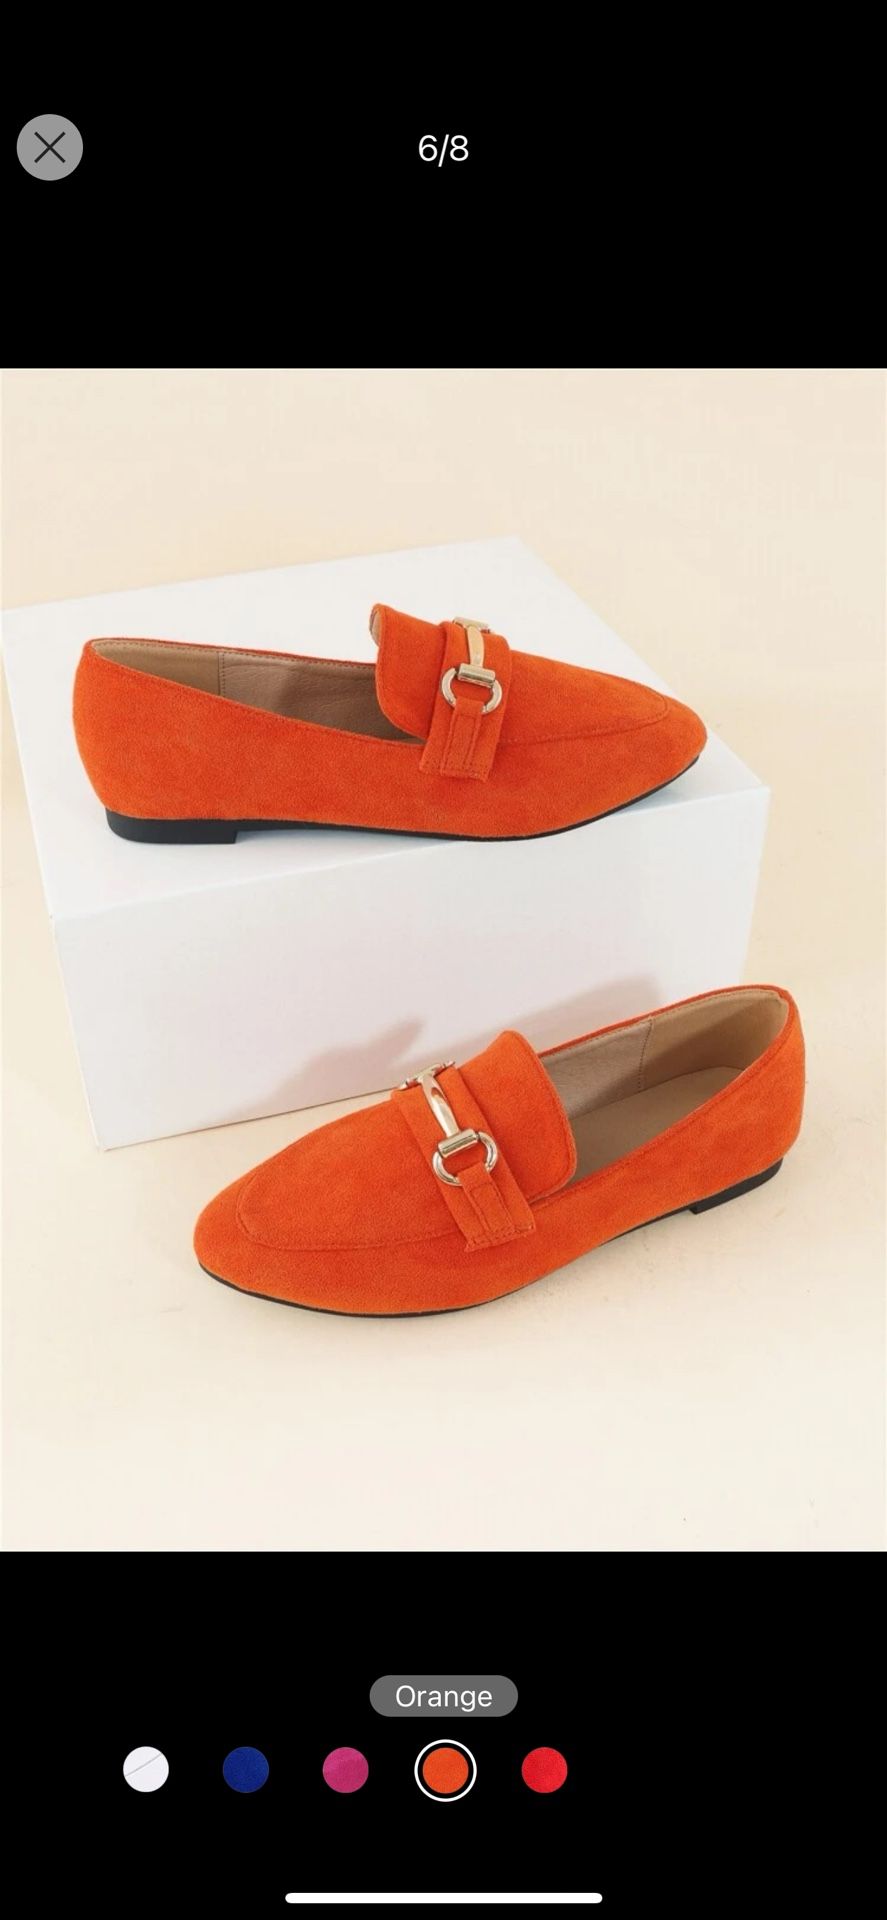 Women's Orange Forward-looking Plain Loafers With Metallic Detailing, Faux Suede Upper And Flat Heels